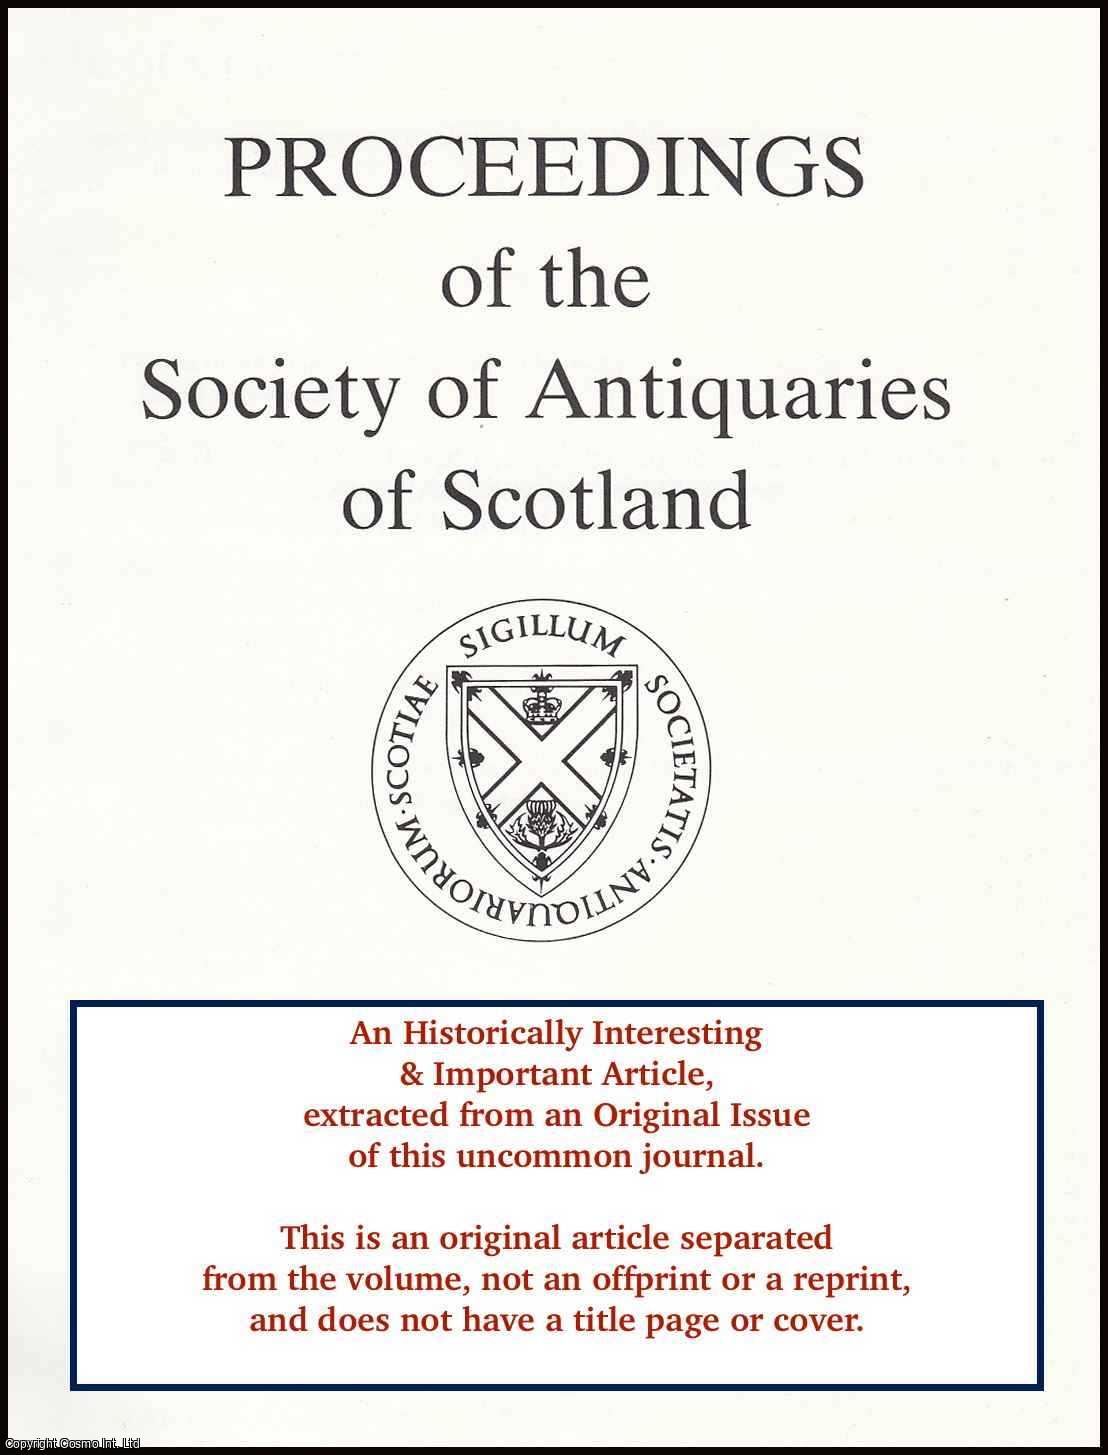 N.M. McQ Holmes & F. Hunter - Roman Counterfeiters' Moulds From Scotland. An original article from the Proceedings of the Society of Antiquaries of Scotland, 2001.